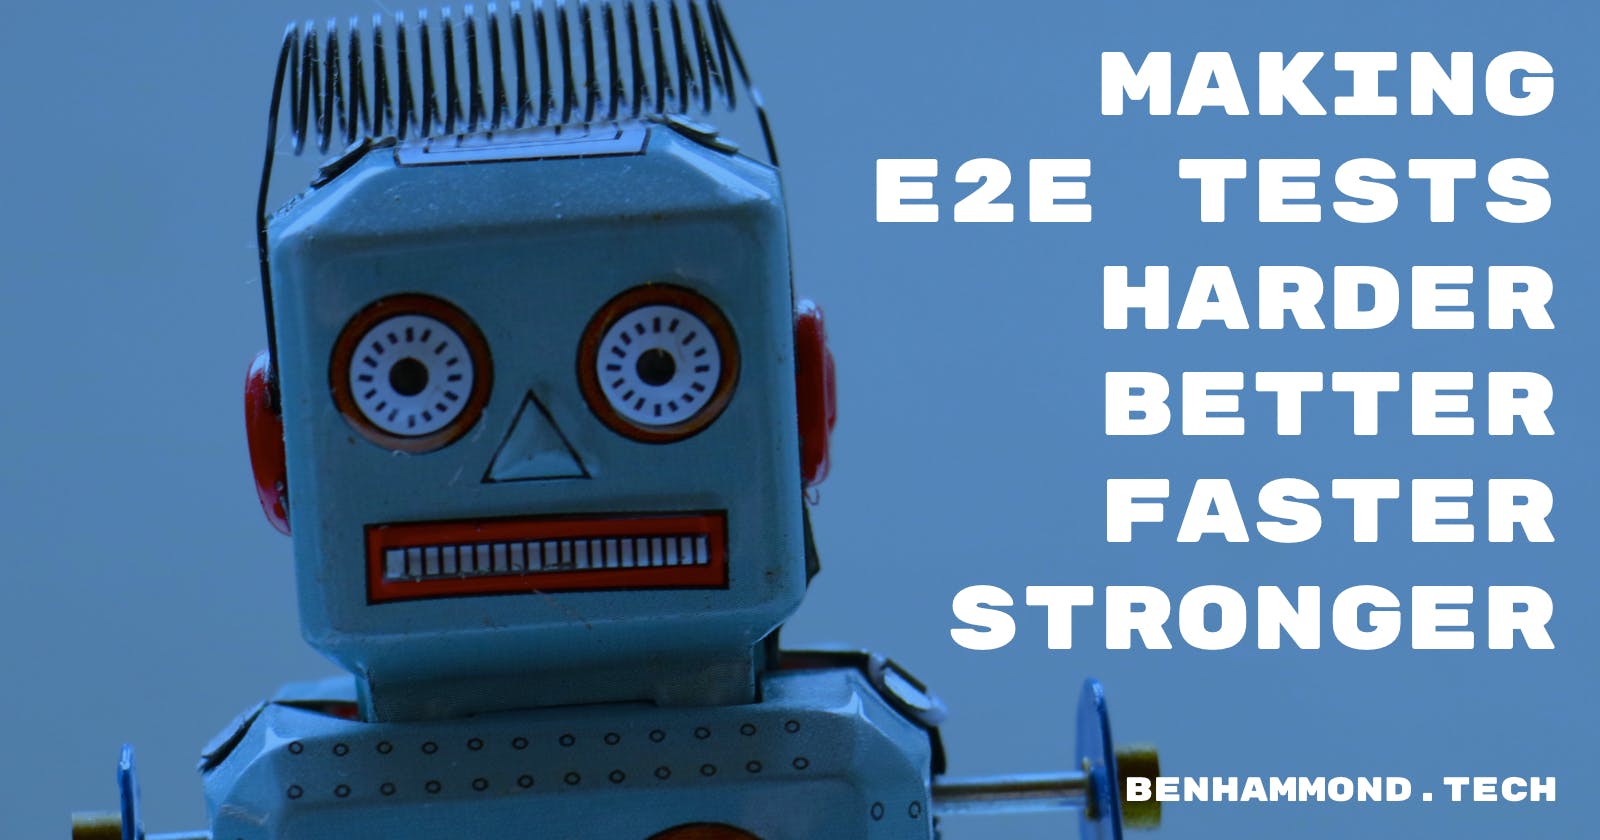 Making E2E Tests Harder, Better, Faster, and Stronger